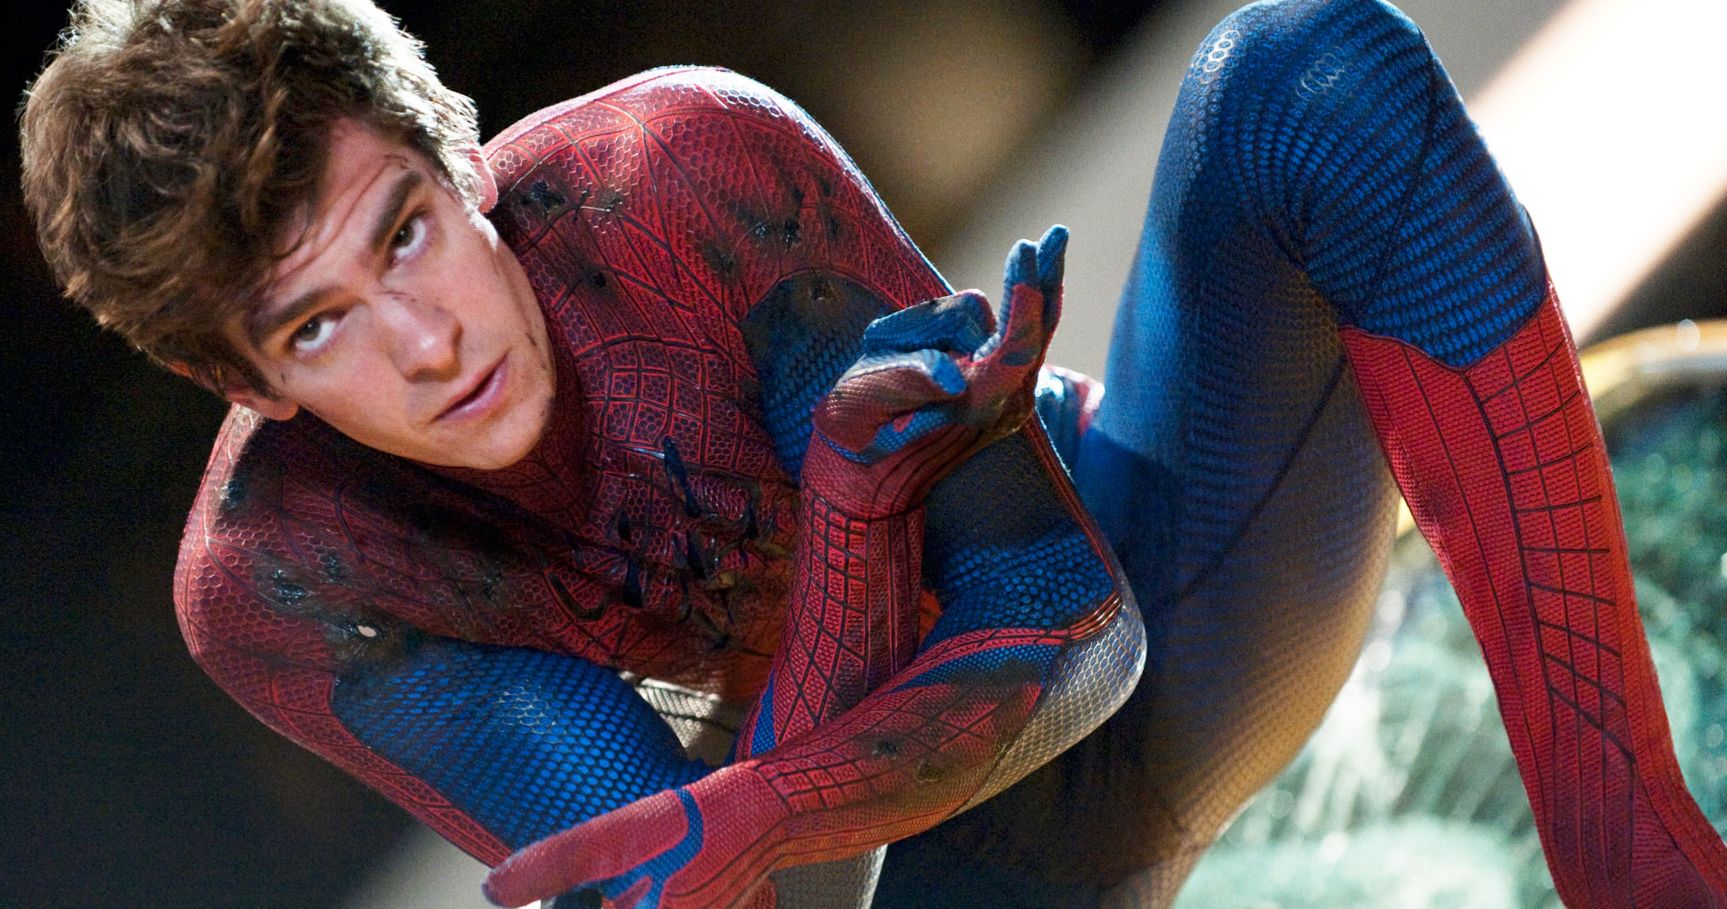 Andrew Garfield Spotted Near Spider-Man 3 Set, Is His Peter Parker Return Confirmed?